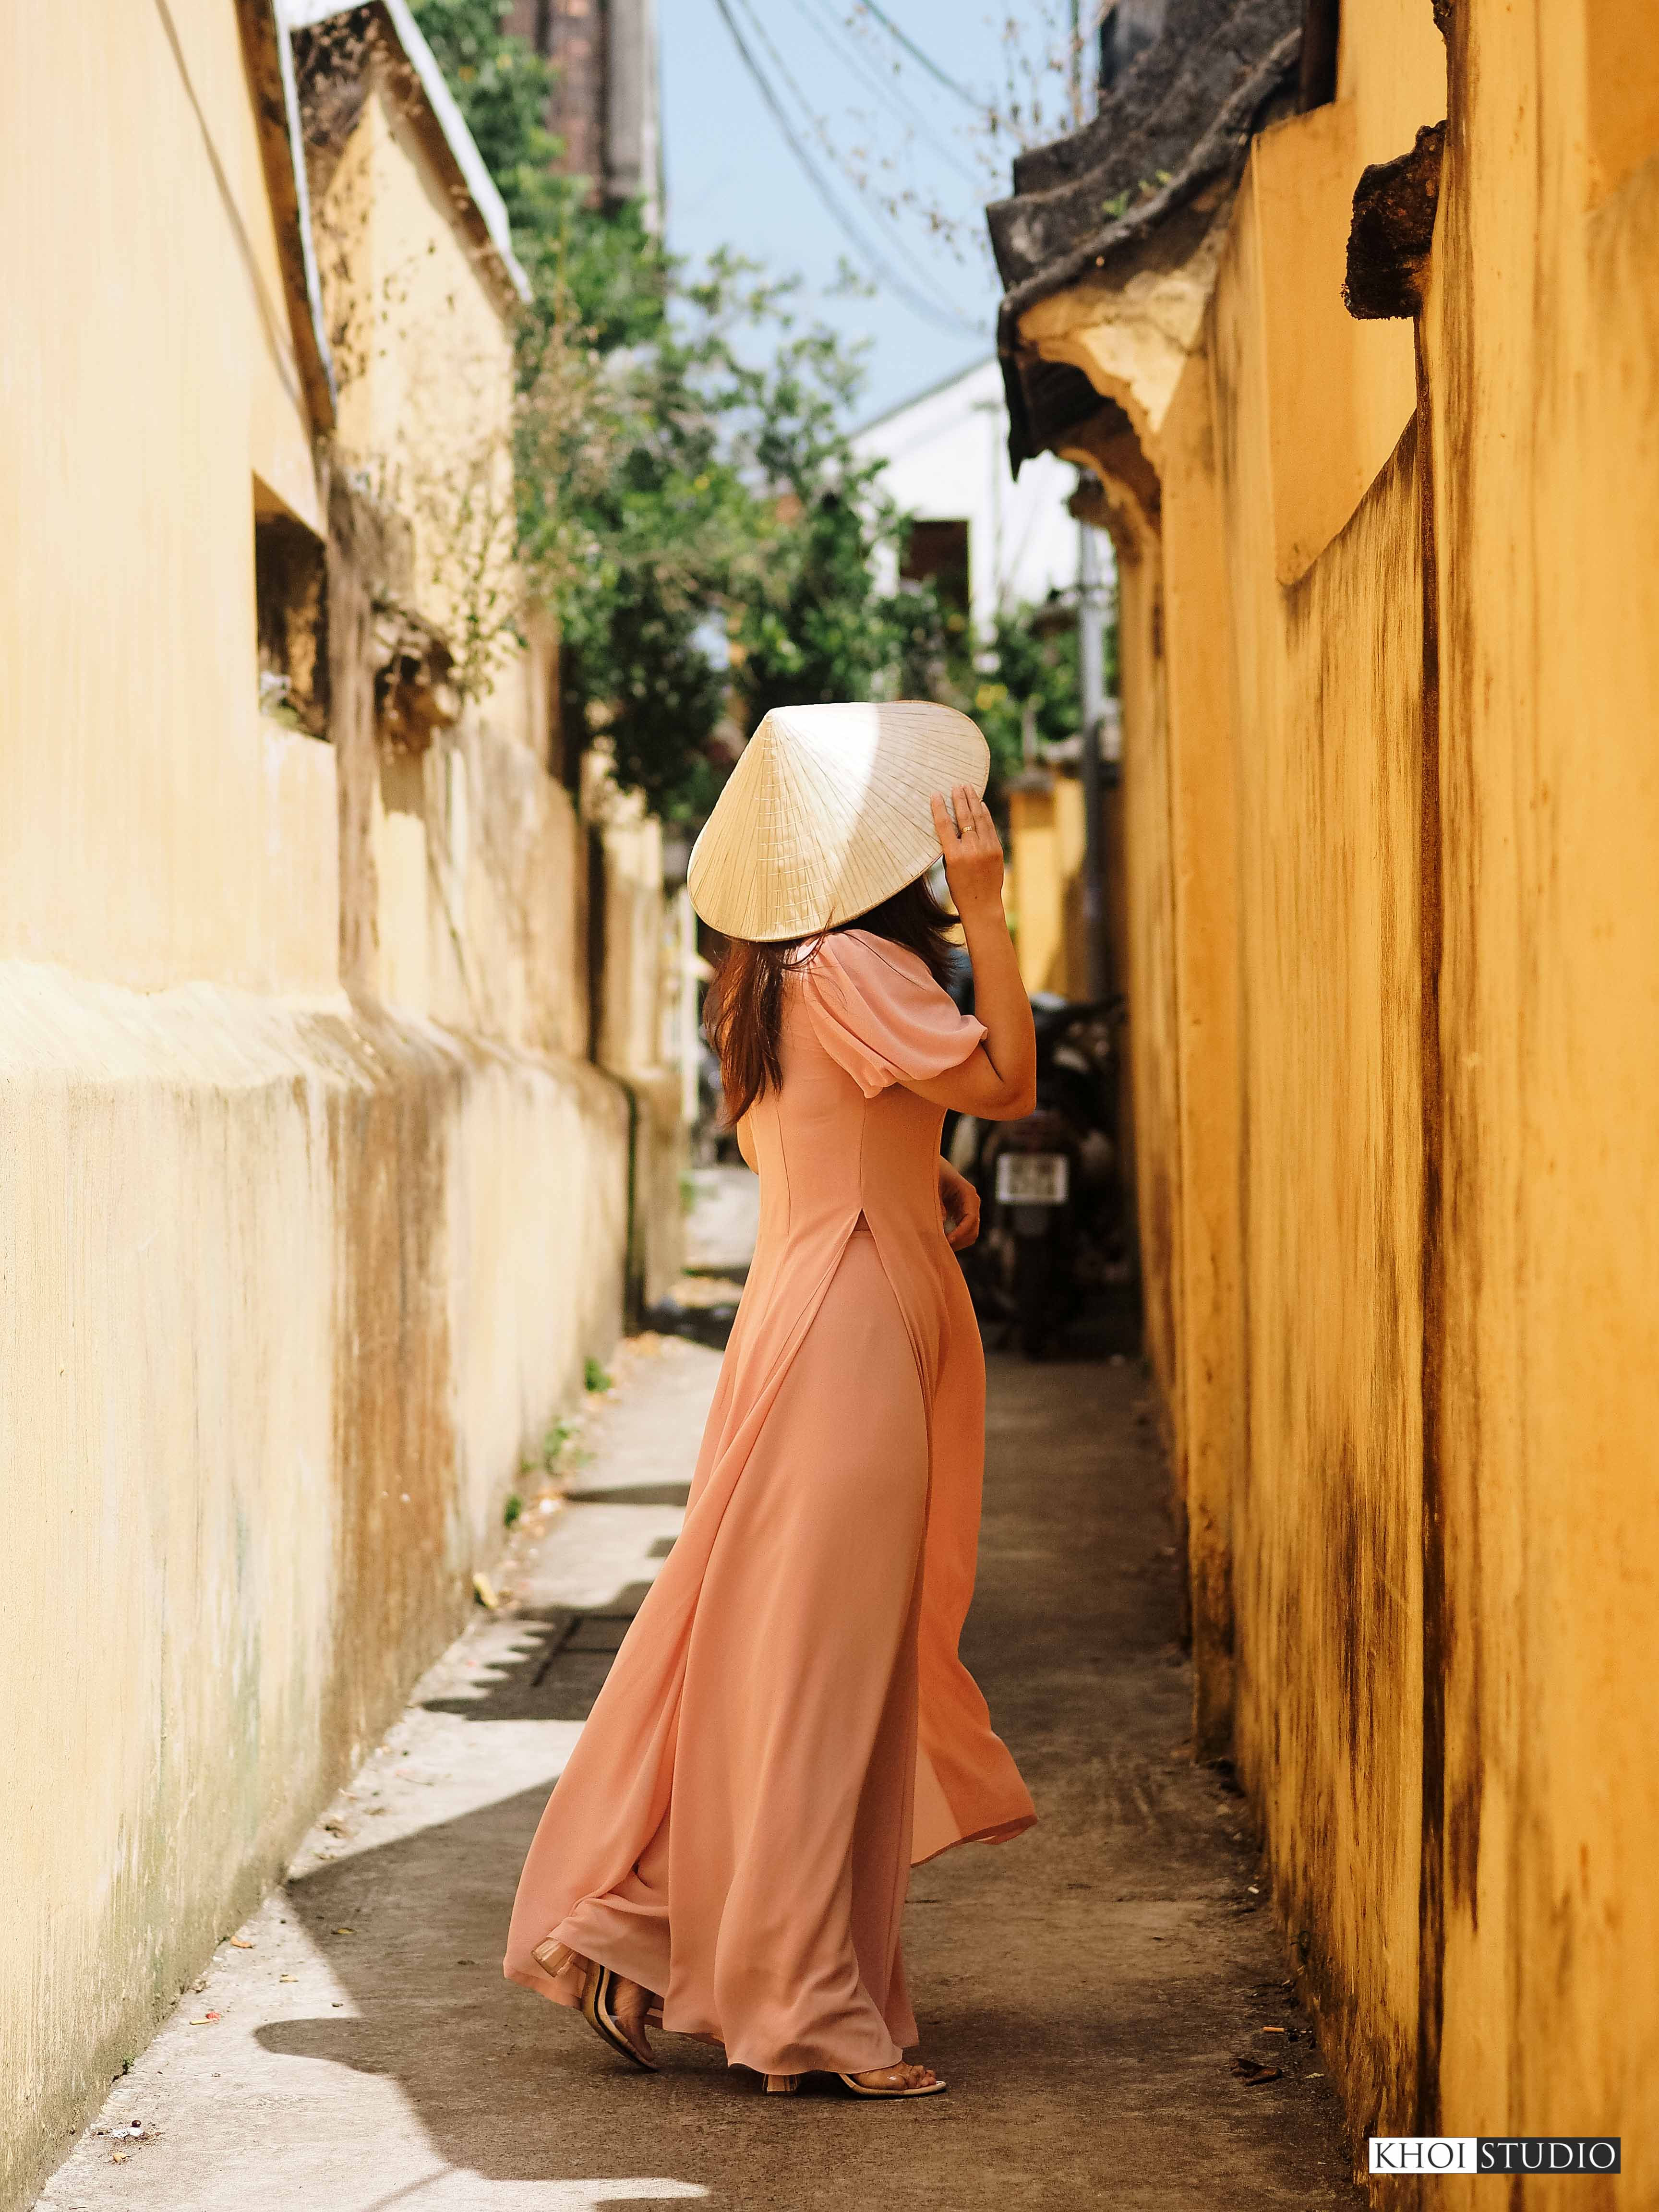 Looking for a photographer to take photos of ao dai in Hoi An: Experience to take pictures at noon in summer in Hoi An ancient town